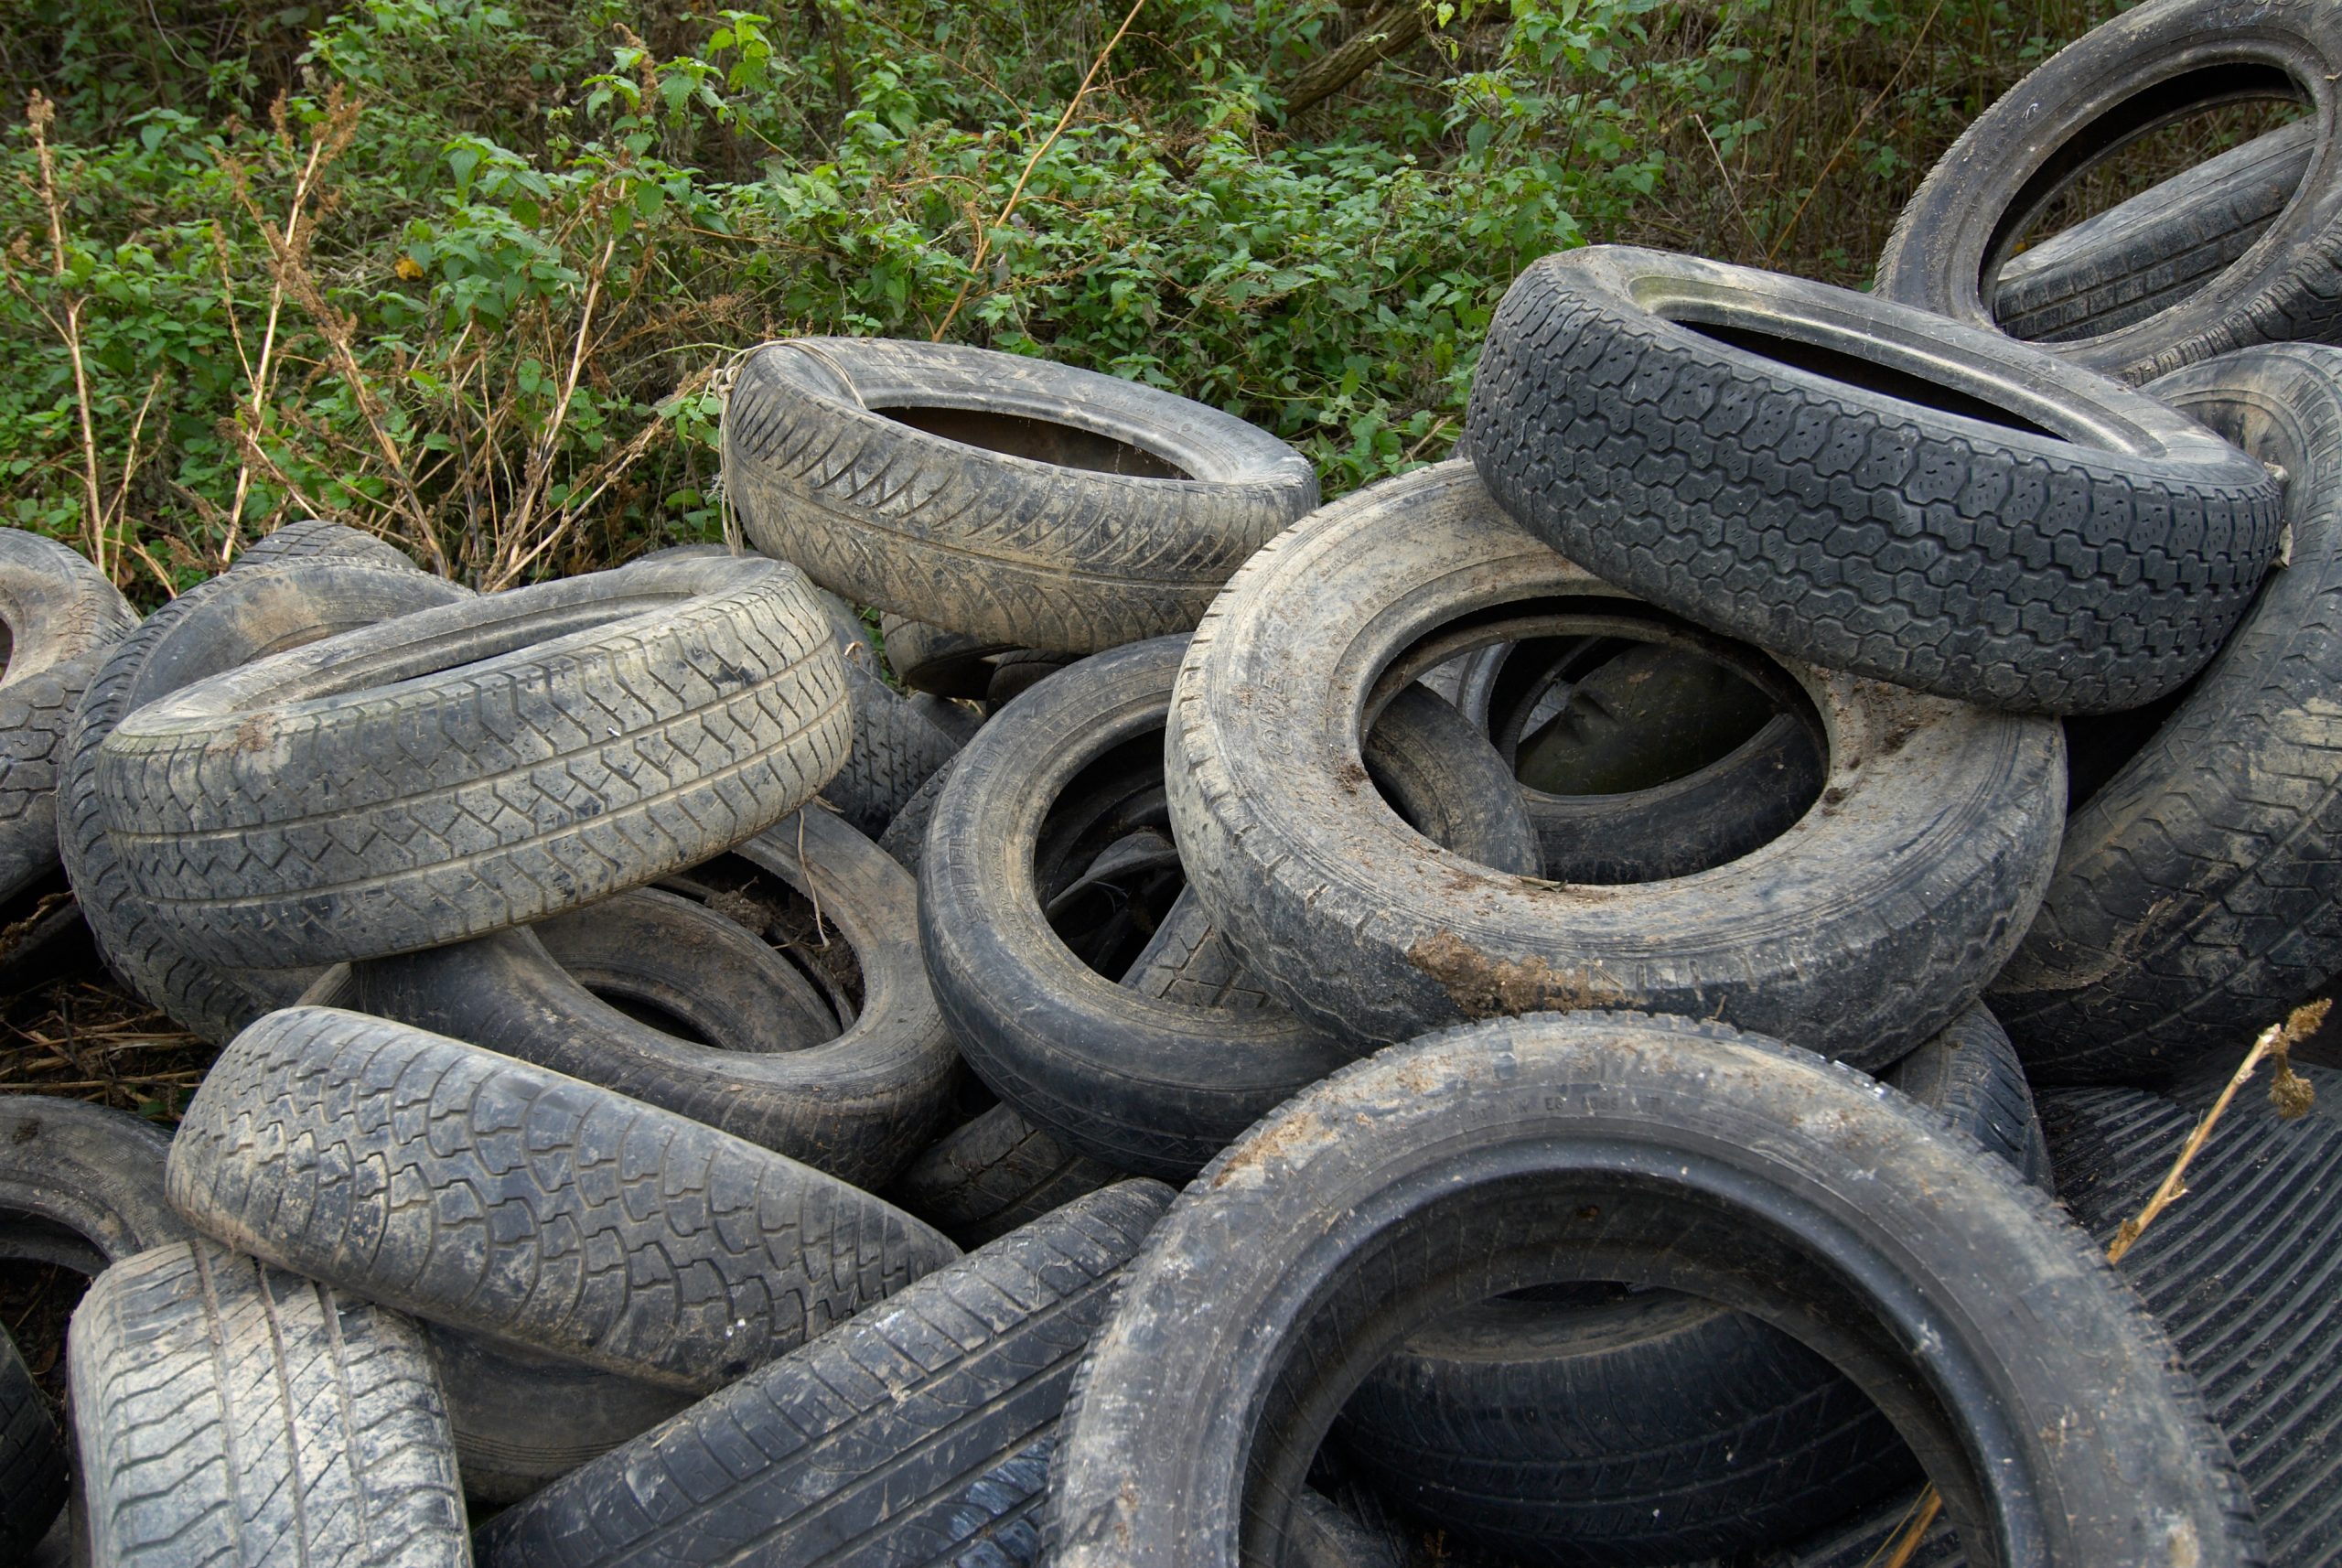 How to end tyre dumping for good in Australia